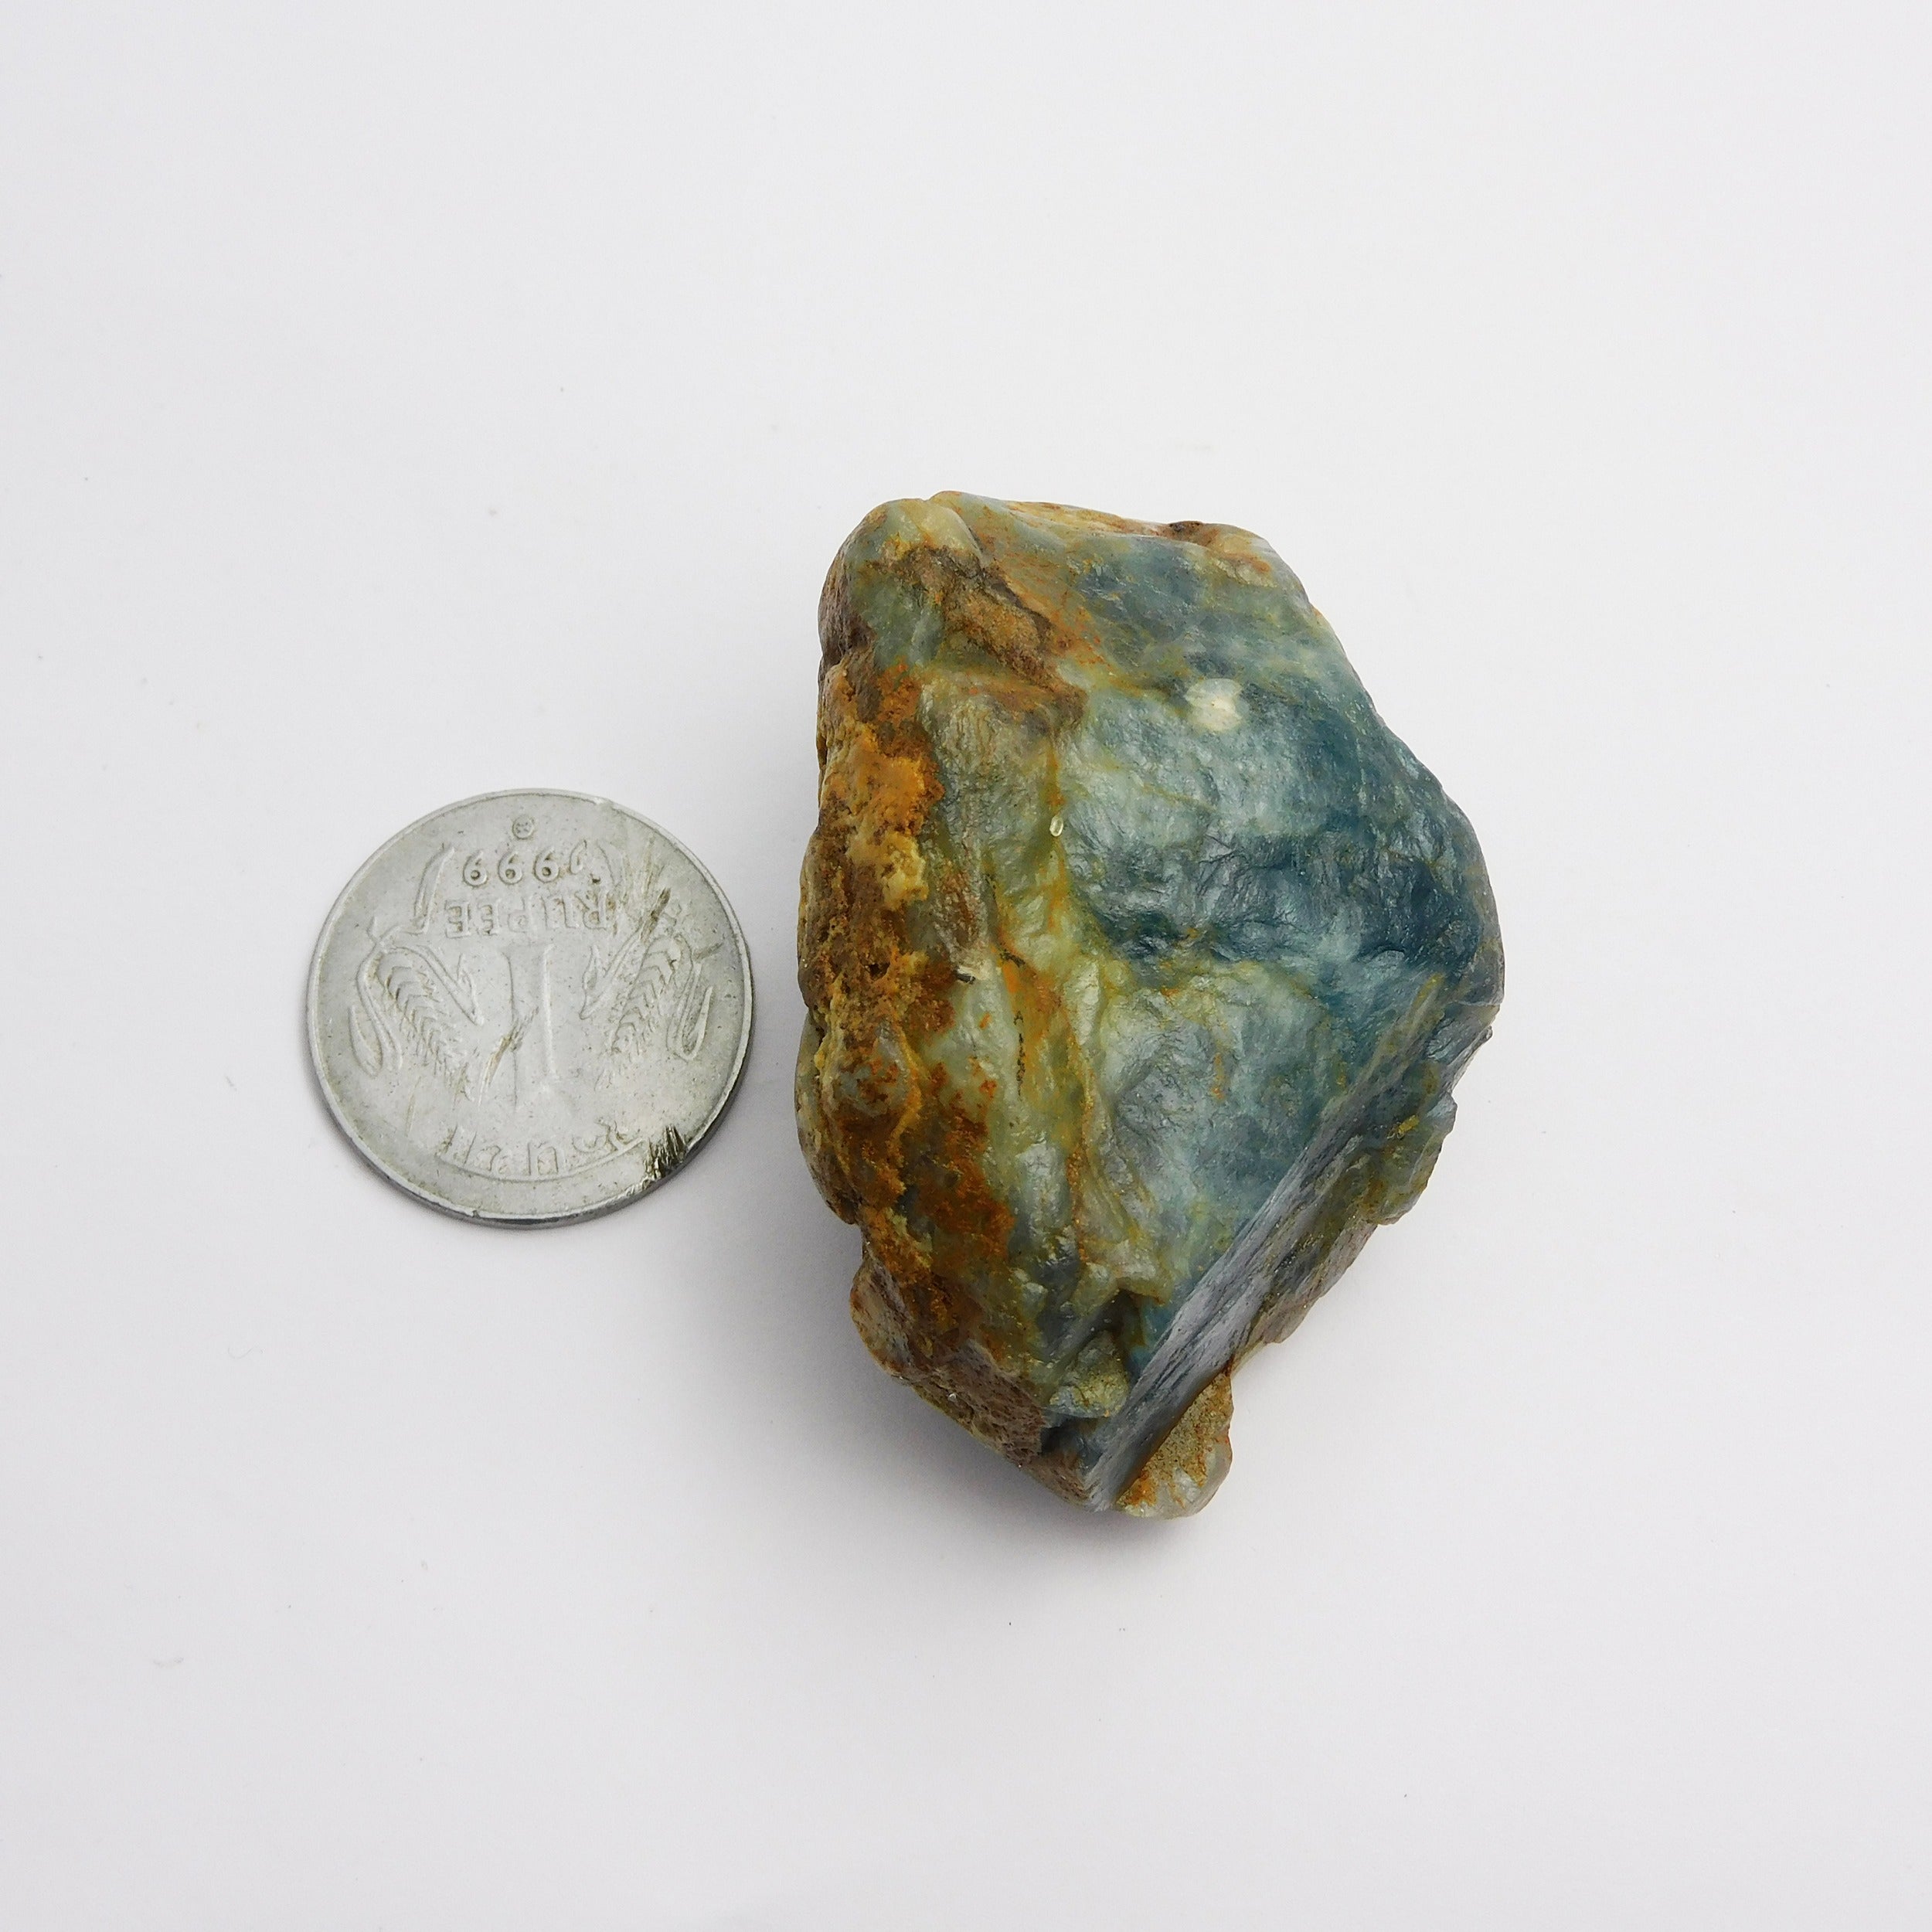 the Amazing Quality: 455.5 Ct Uncut Green Fluorite Multi-Color Rough Certified Natural-Earth Mined from Brazil Mines-A Huge Gemstone Treasure